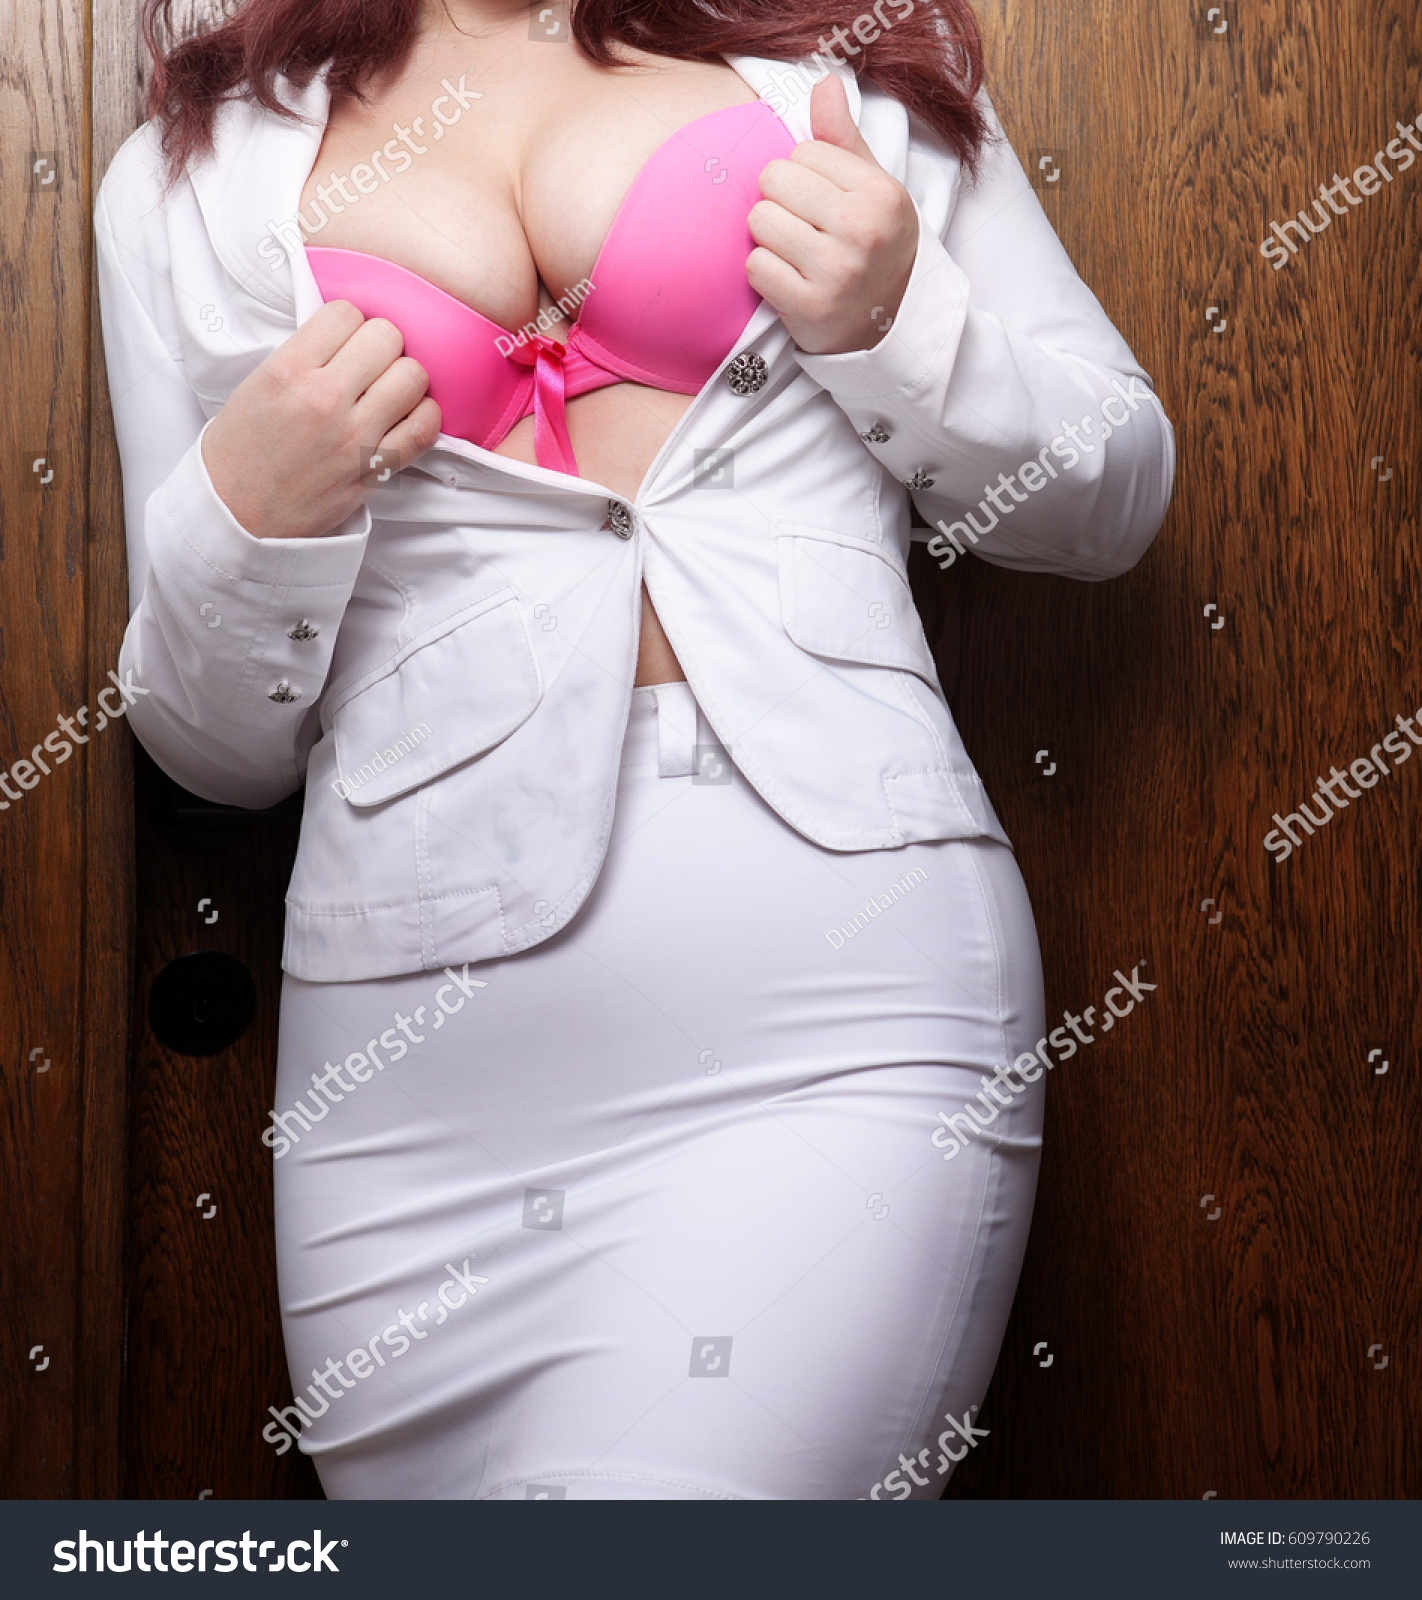 Sexy secretary Images and Stock Photos. 10,871 Sexy 